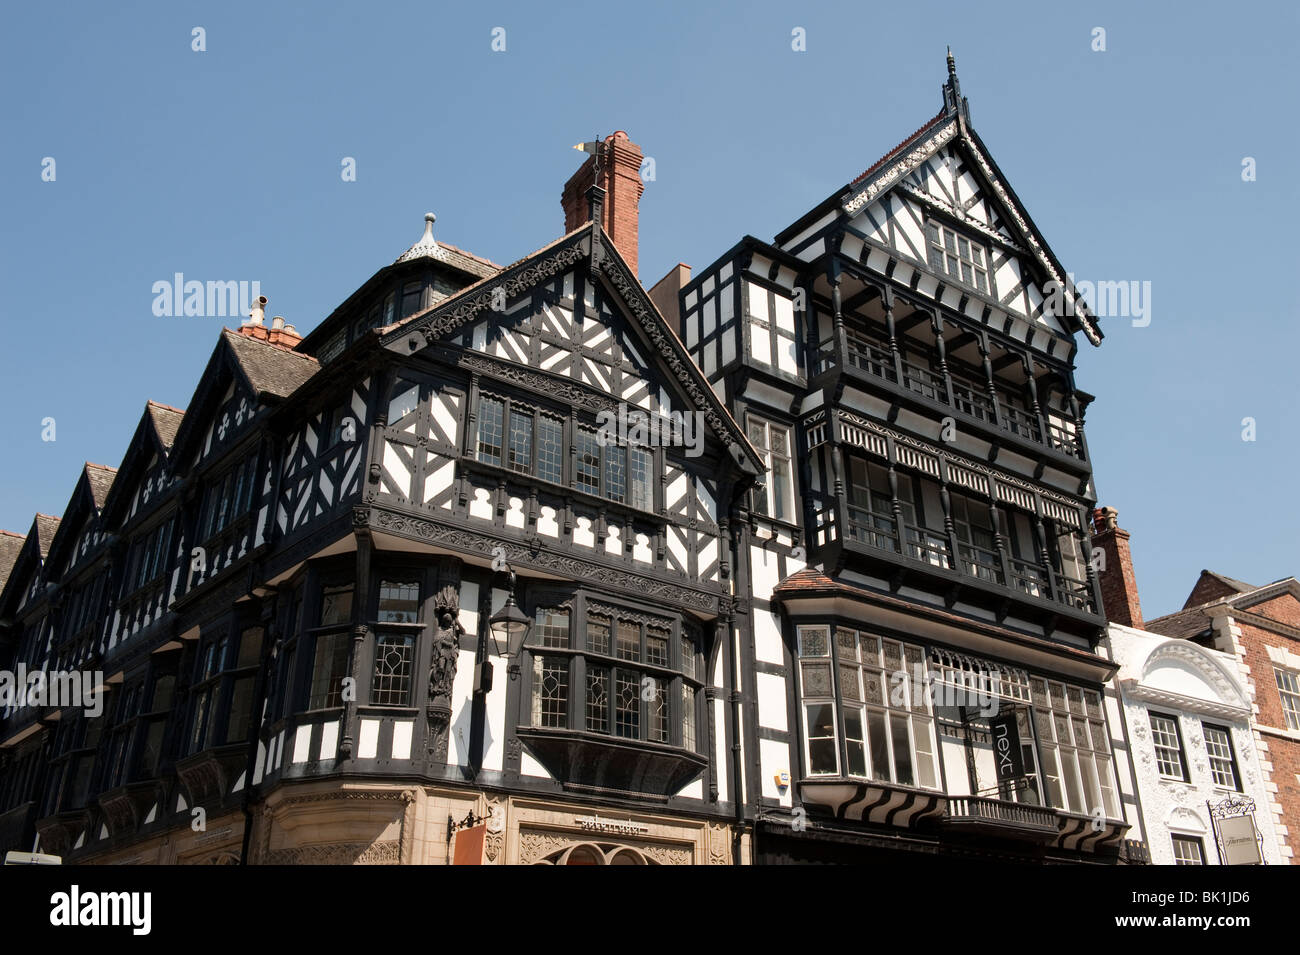 Black and white buildings Chester Cheshire UK Stock Photo